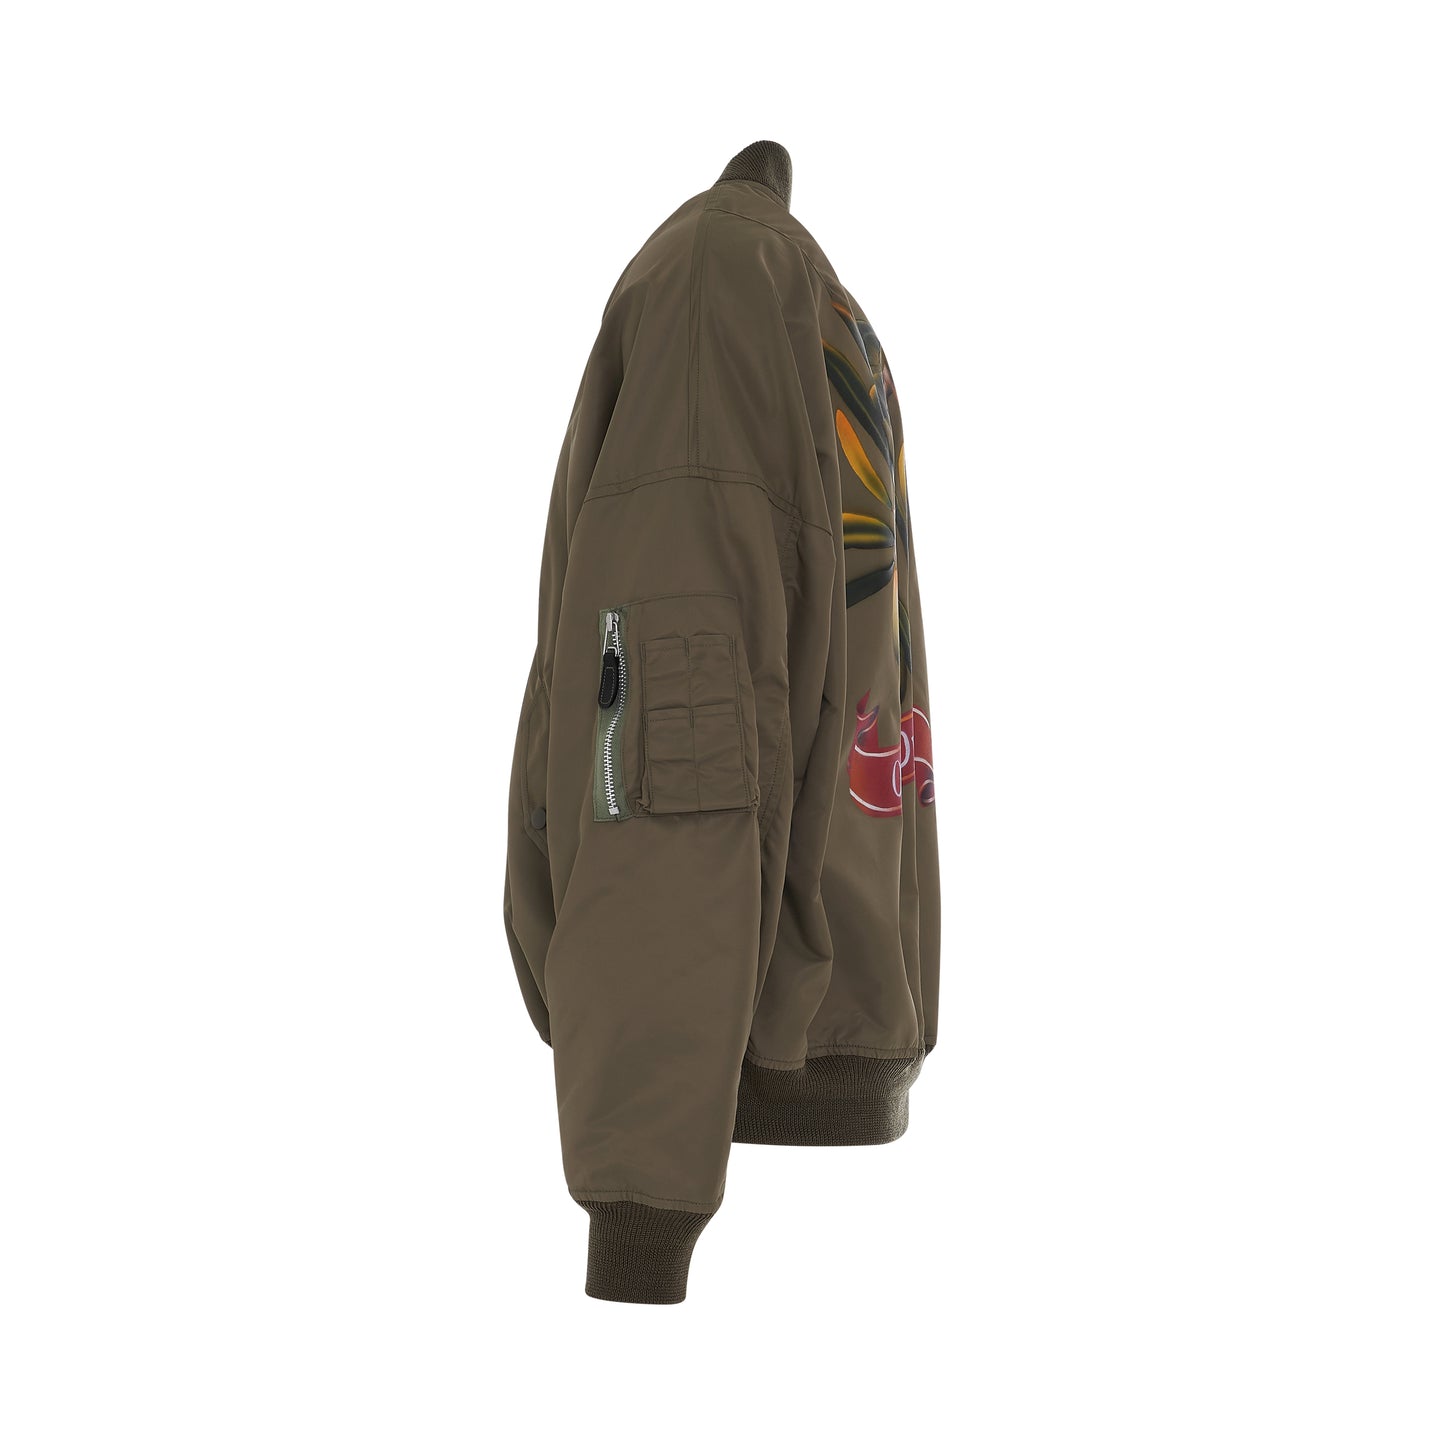 Vegetable Dyed MA-1 Bomber Jacket in Olive